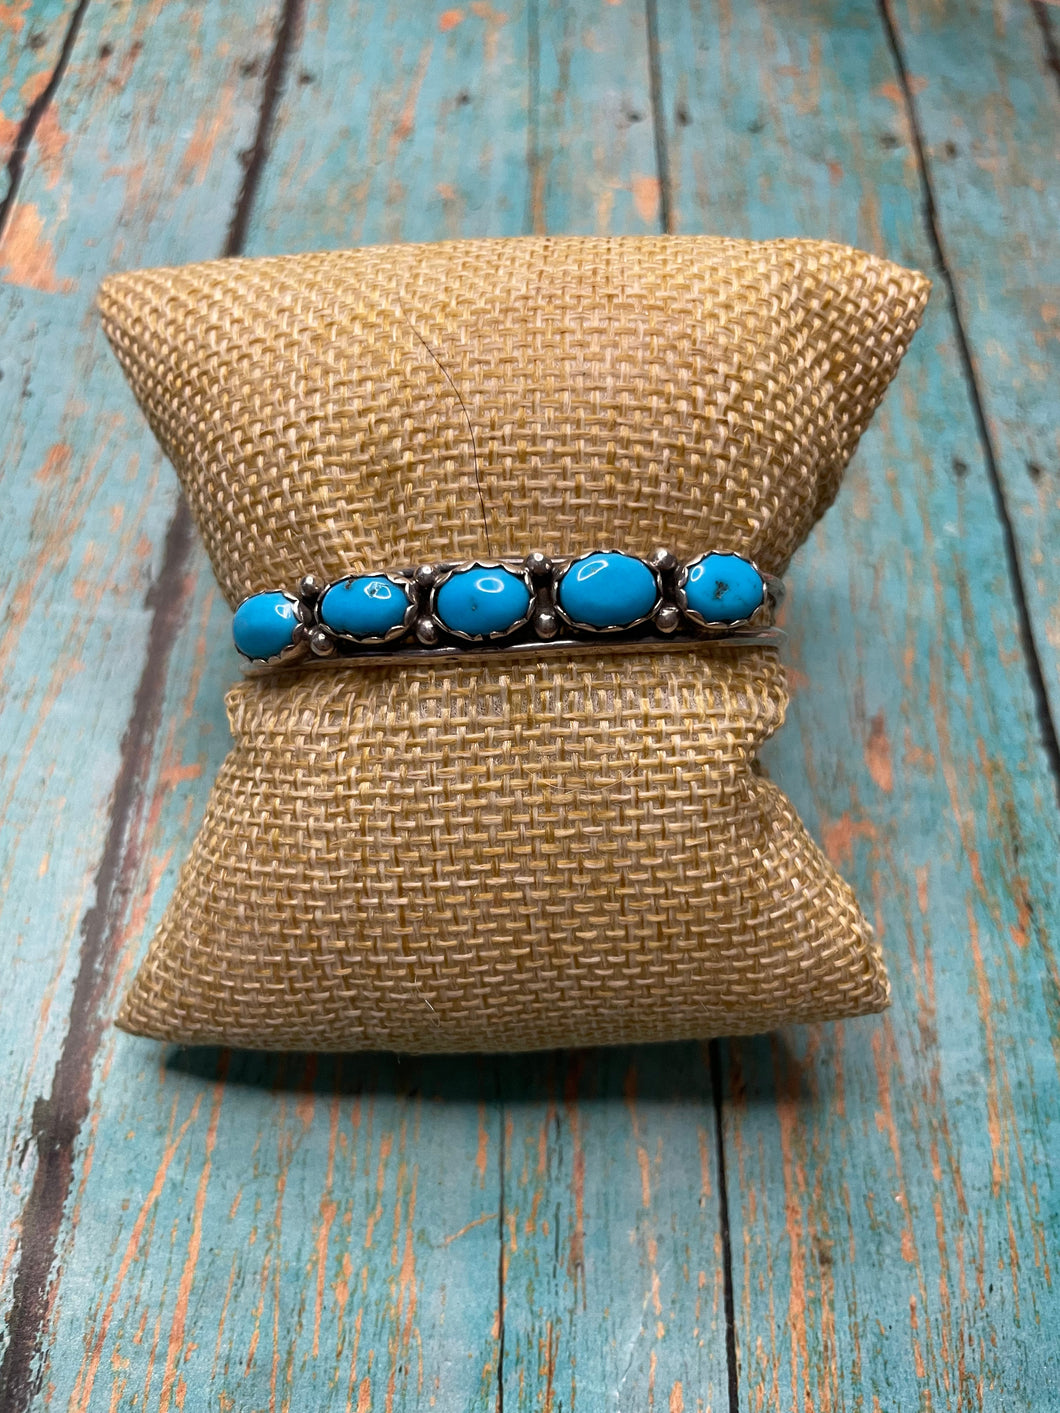 Navajo Sterling Silver & Turquoise Stacker Cuff Bracelet